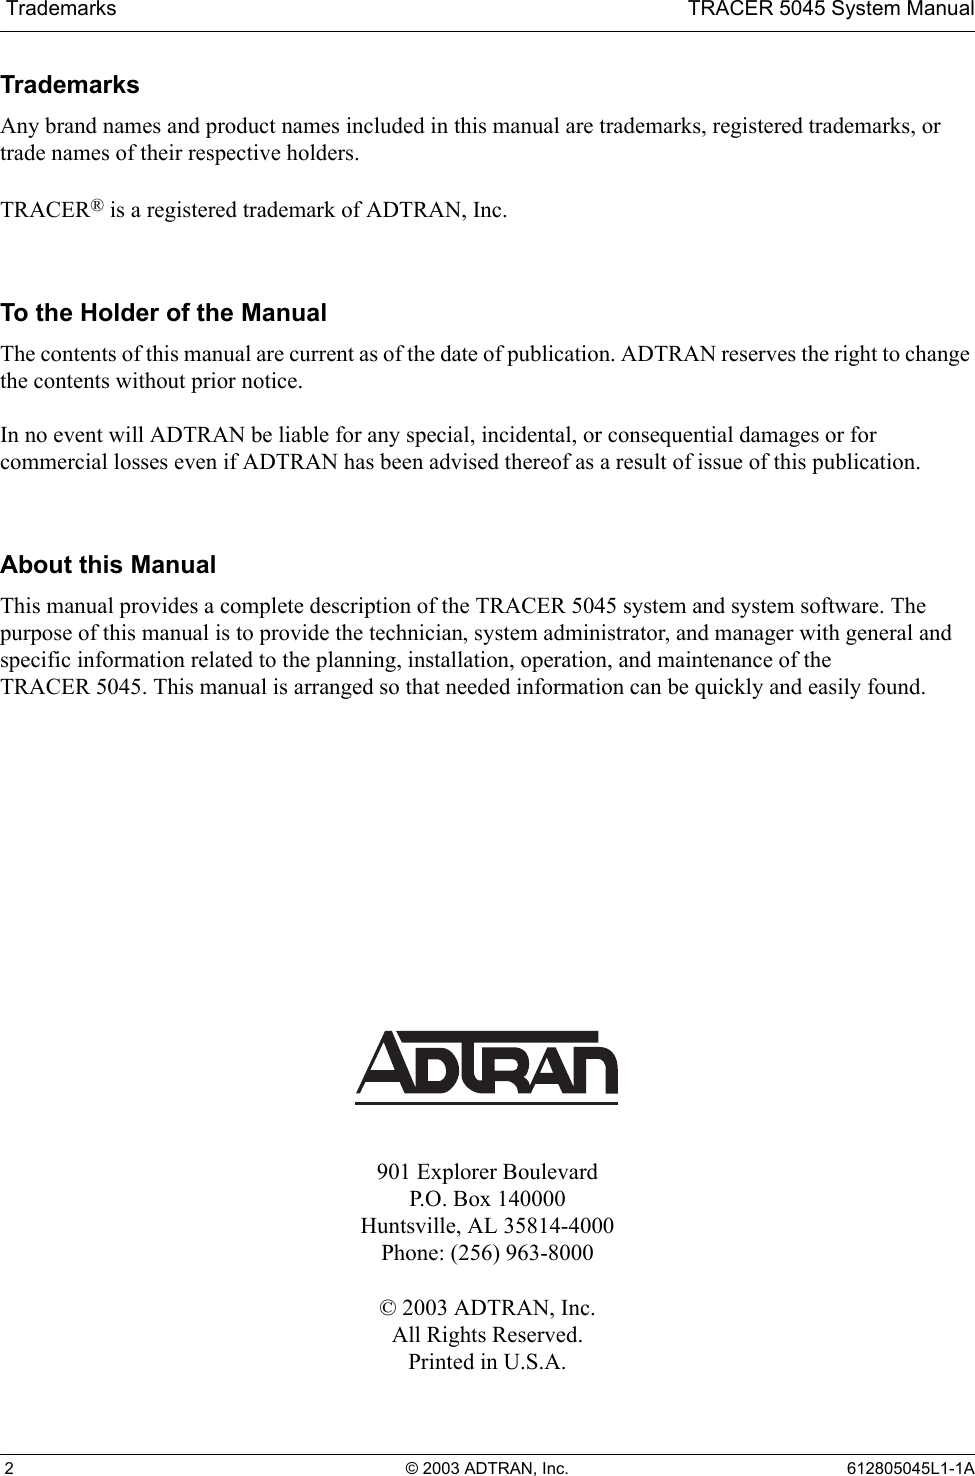  Trademarks TRACER 5045 System Manual 2 © 2003 ADTRAN, Inc. 612805045L1-1ATrademarksAny brand names and product names included in this manual are trademarks, registered trademarks, or trade names of their respective holders.TRACER® is a registered trademark of ADTRAN, Inc.To the Holder of the ManualThe contents of this manual are current as of the date of publication. ADTRAN reserves the right to change the contents without prior notice.In no event will ADTRAN be liable for any special, incidental, or consequential damages or for commercial losses even if ADTRAN has been advised thereof as a result of issue of this publication.About this ManualThis manual provides a complete description of the TRACER 5045 system and system software. The purpose of this manual is to provide the technician, system administrator, and manager with general and specific information related to the planning, installation, operation, and maintenance of the TRACER 5045. This manual is arranged so that needed information can be quickly and easily found. 901 Explorer BoulevardP.O. Box 140000Huntsville, AL 35814-4000Phone: (256) 963-8000© 2003 ADTRAN, Inc.All Rights Reserved.Printed in U.S.A.